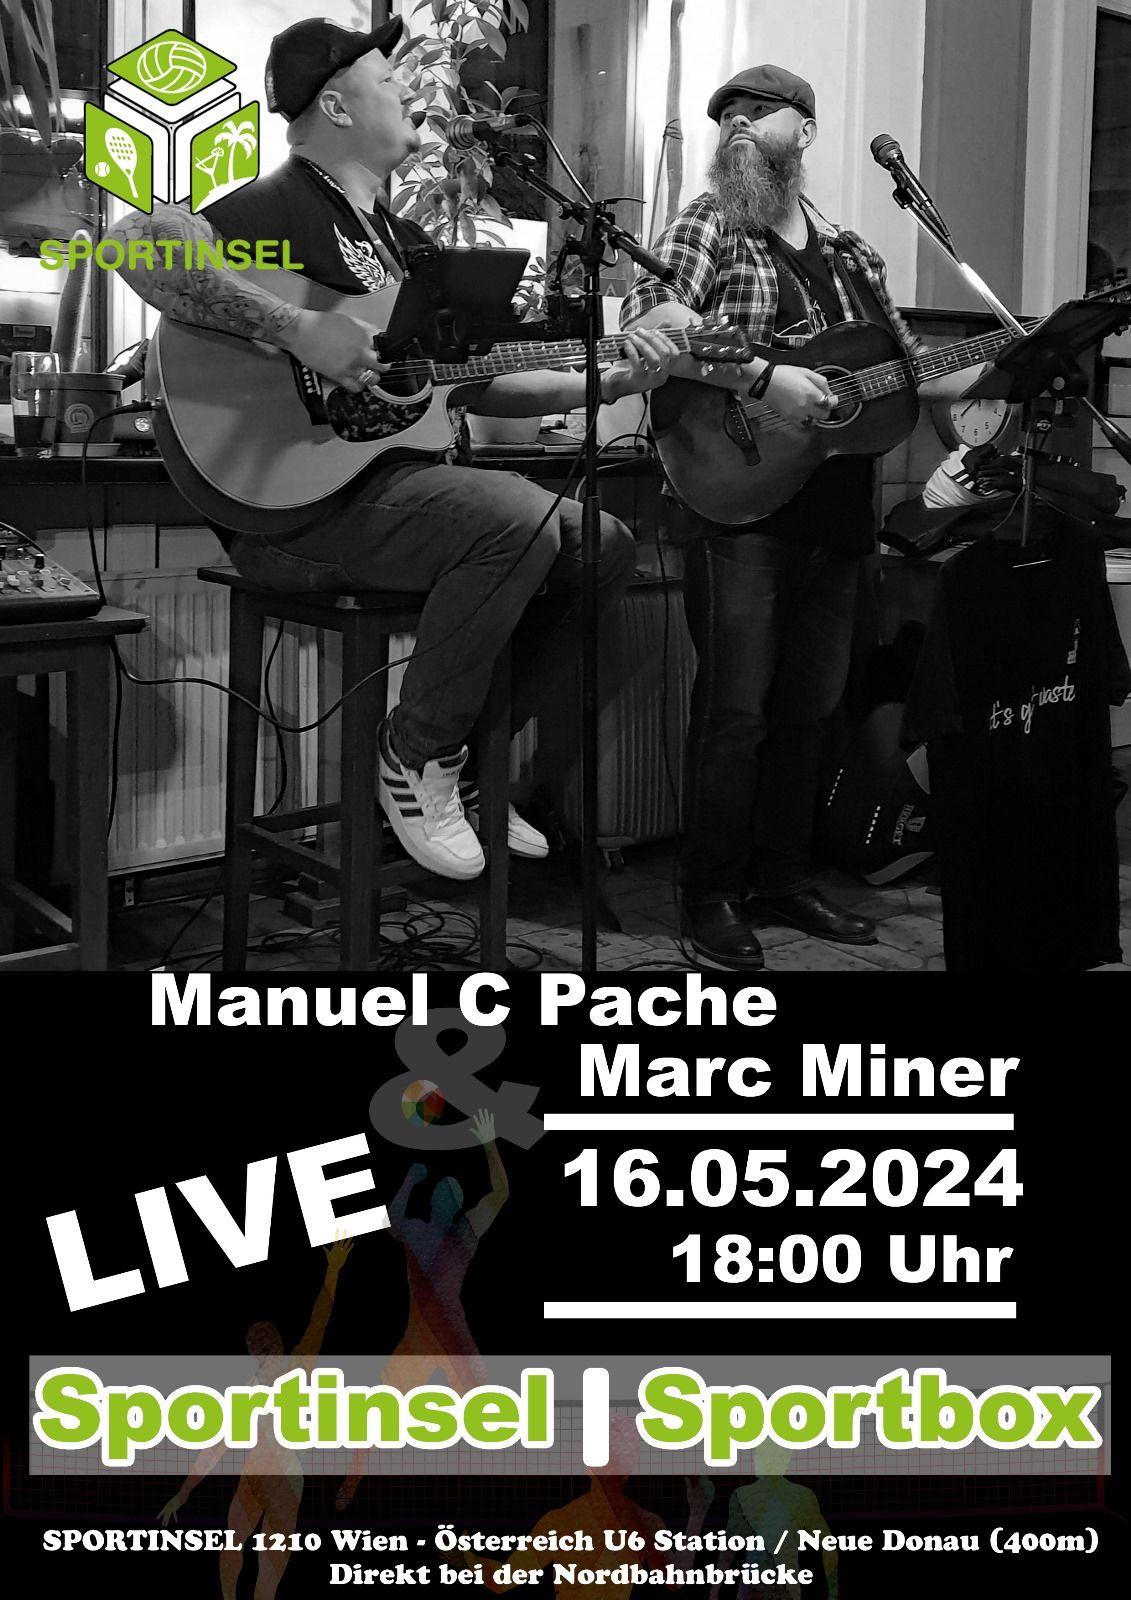 LIVE: Manuel C. Pache & Marc Miner at LAOLA 1 Sportinsel Donauinsel